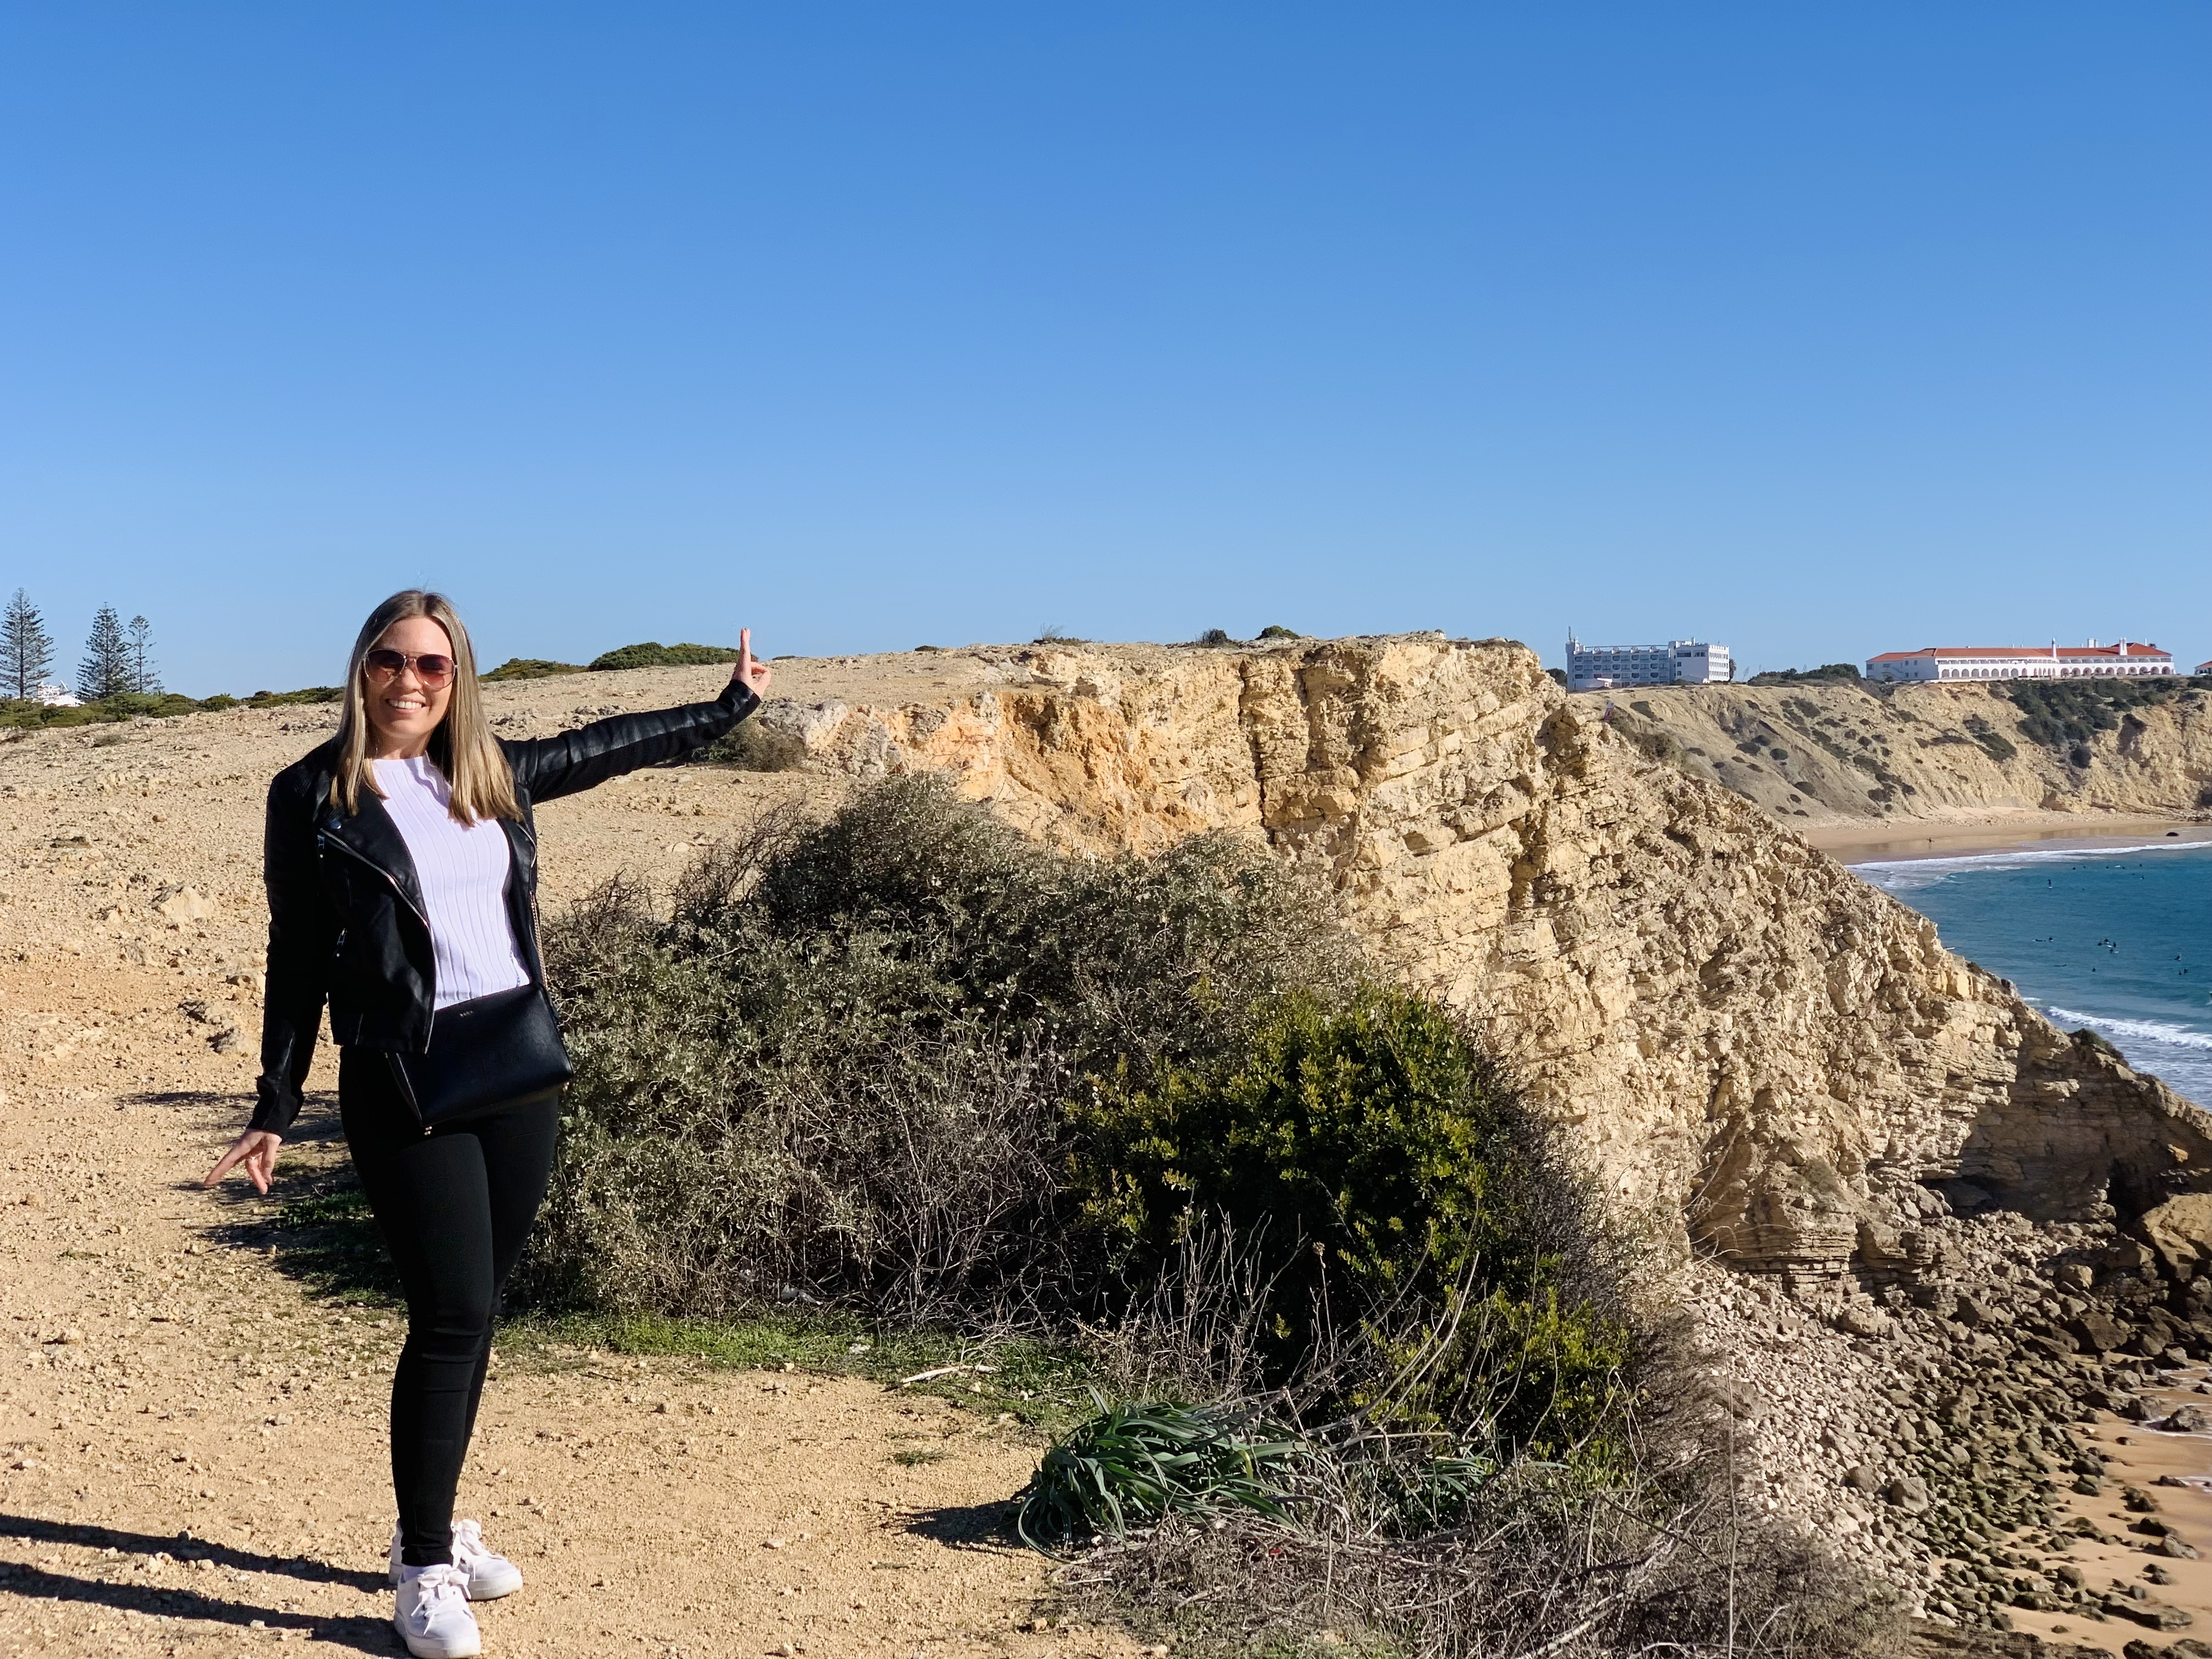 What to see in the Algarve? – part 1